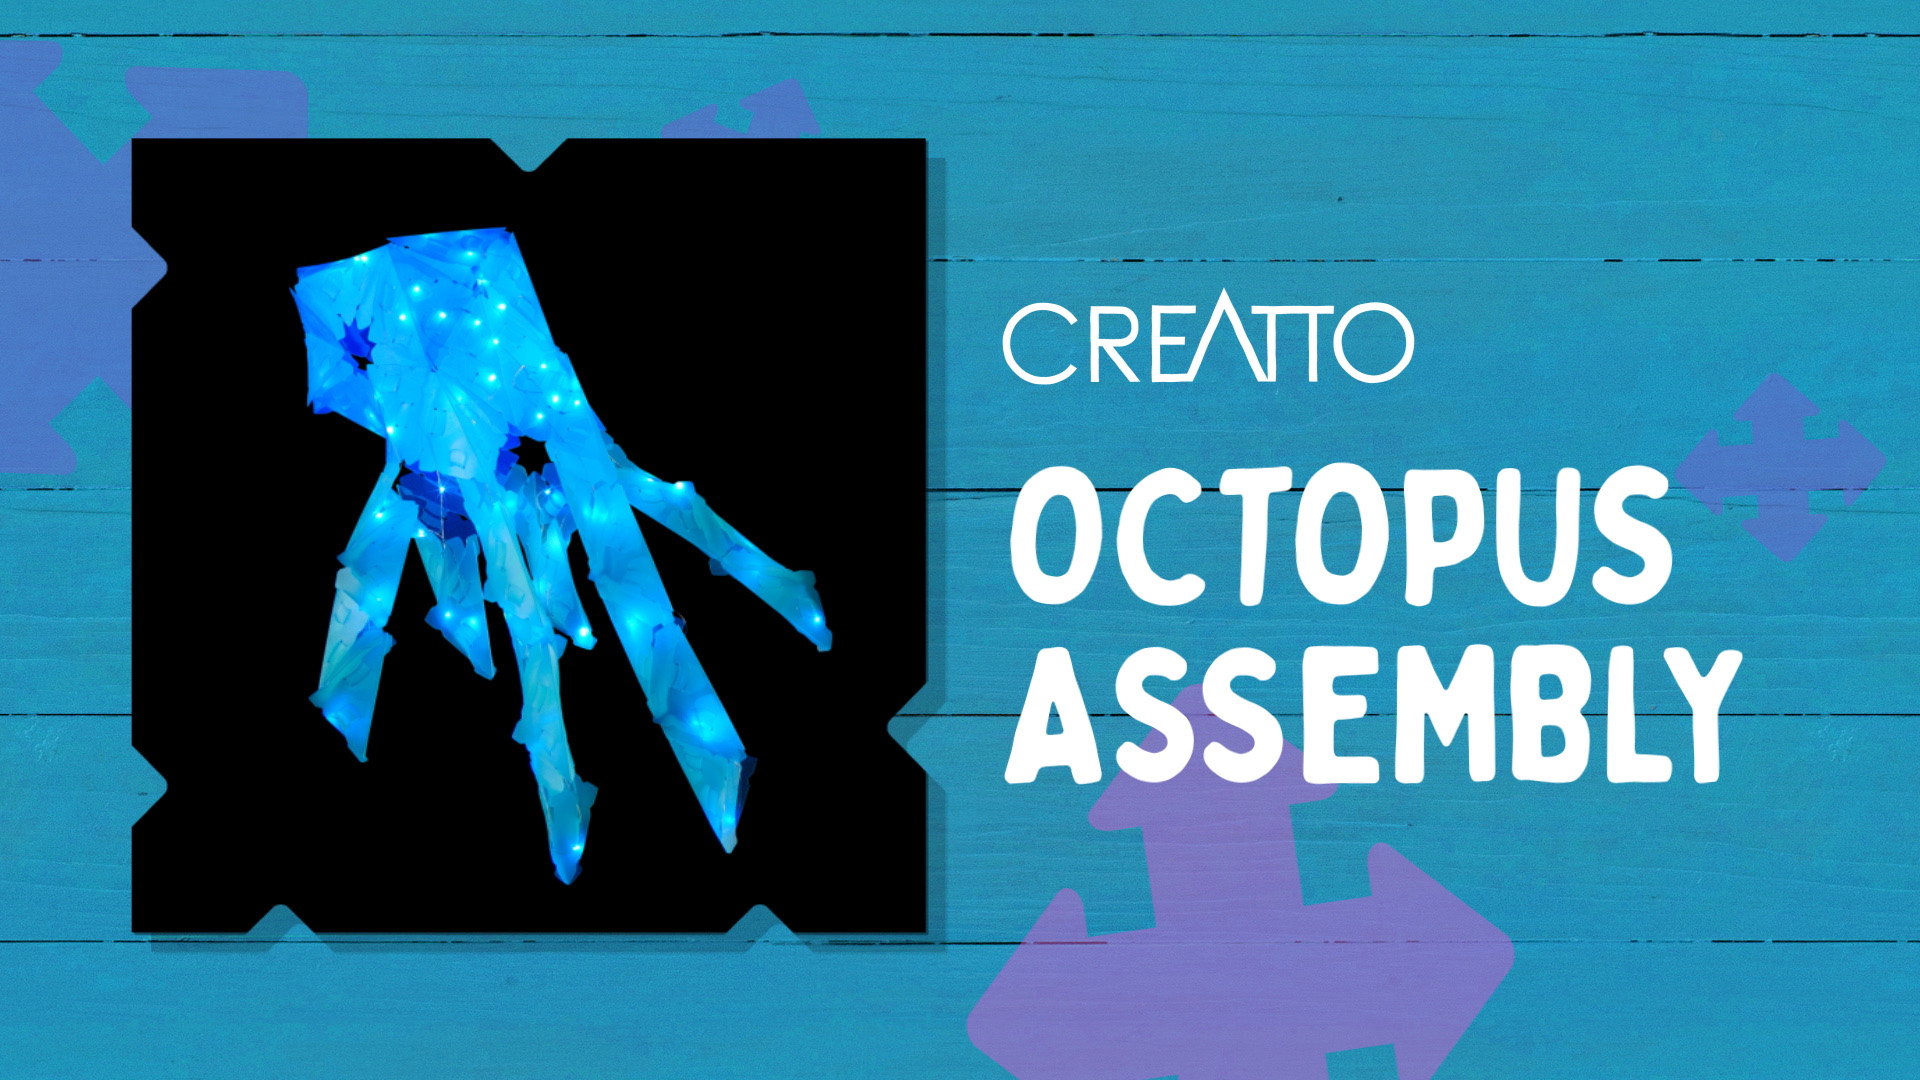 Creatto_-_Octopus_Assembly.jpg